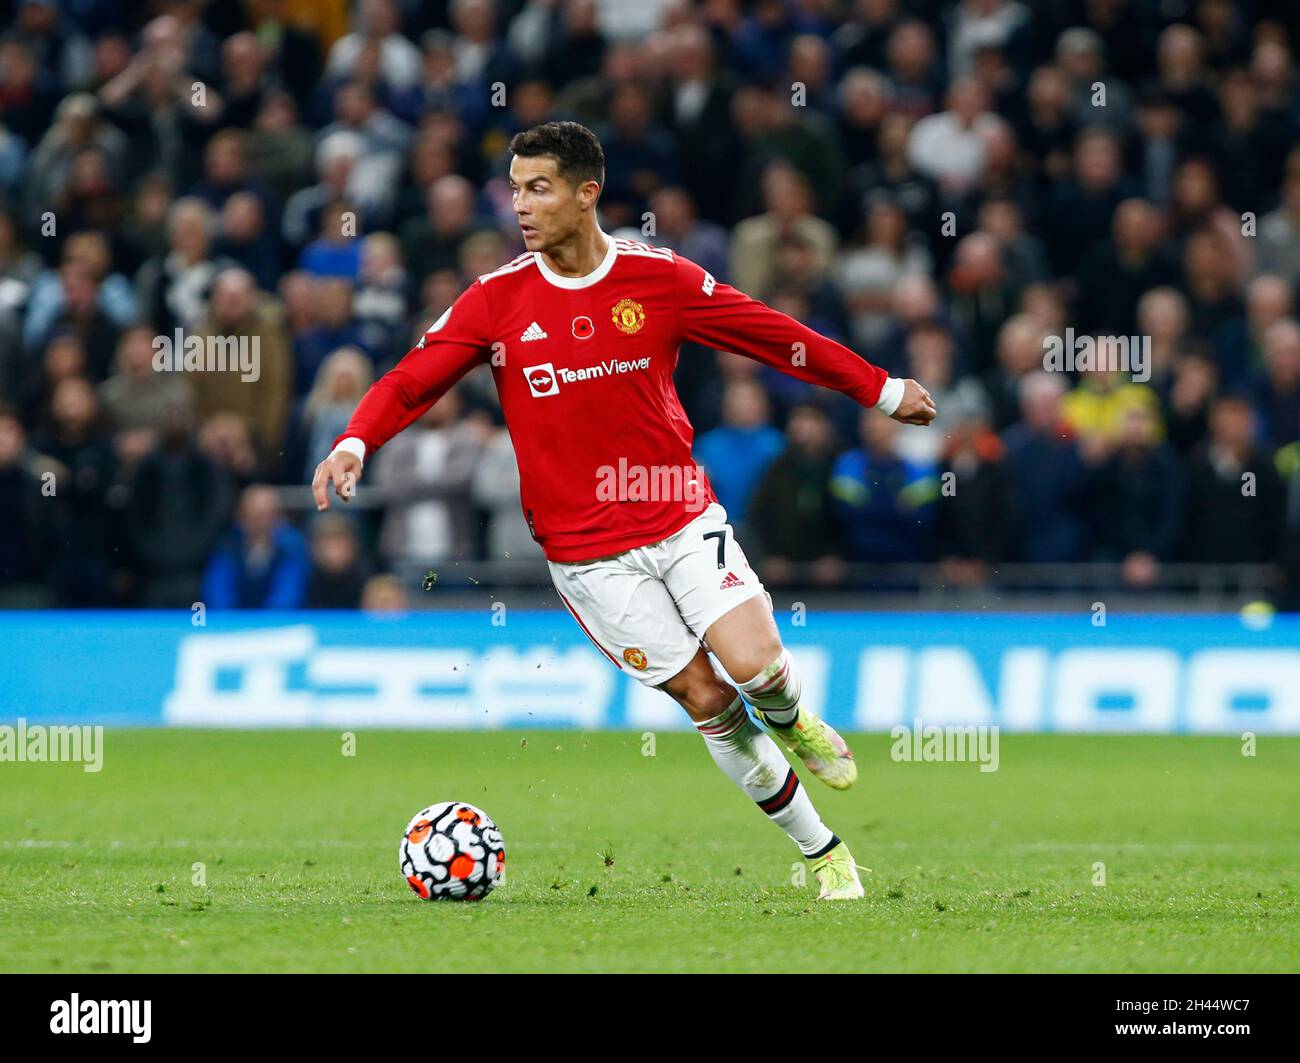 London, England - OCTOBER 30:Manchester United's Cristiano Ronaldo during  Premier League between Tottenham Hotspur and Manchester United  at Tottenha Stock Photo